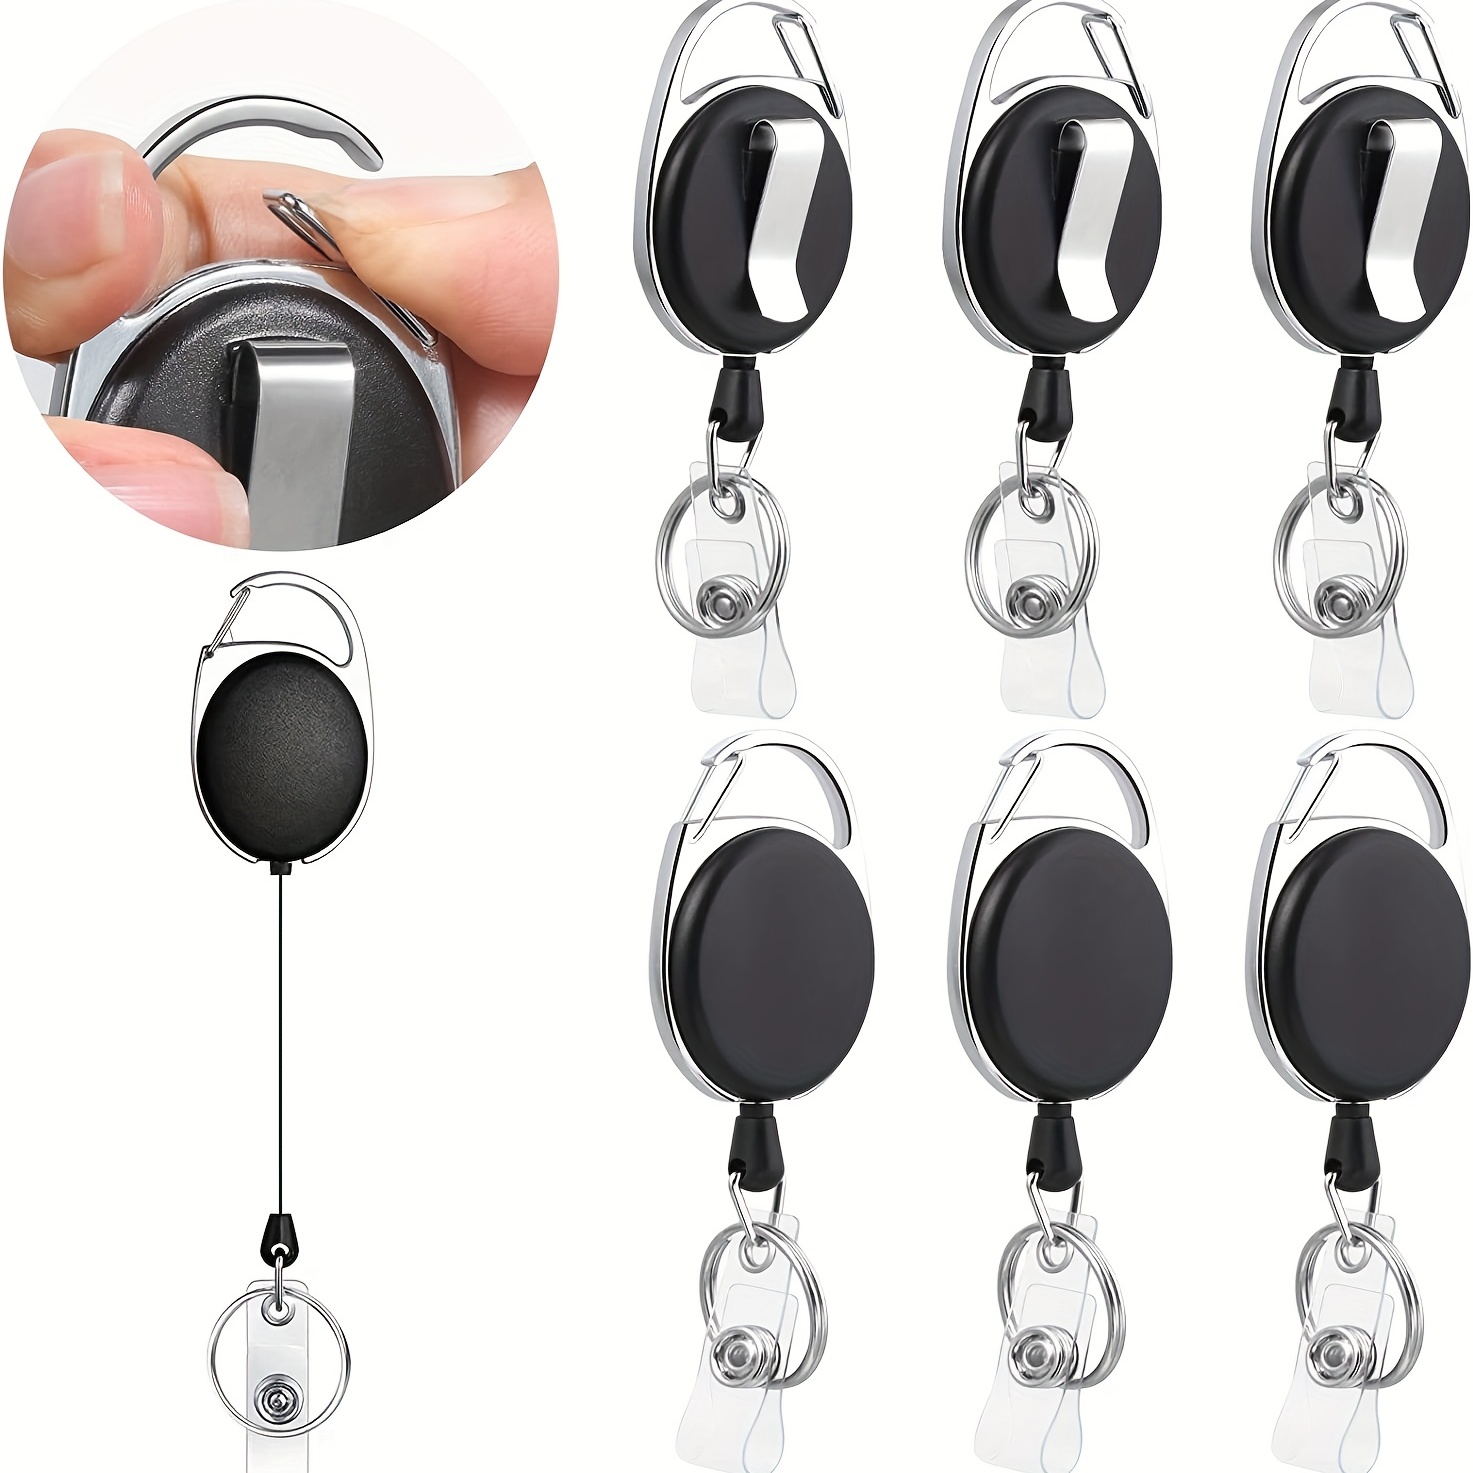 3pcs Retractable Badge Holders - Keep Your ID Secure & Easily Accessible!